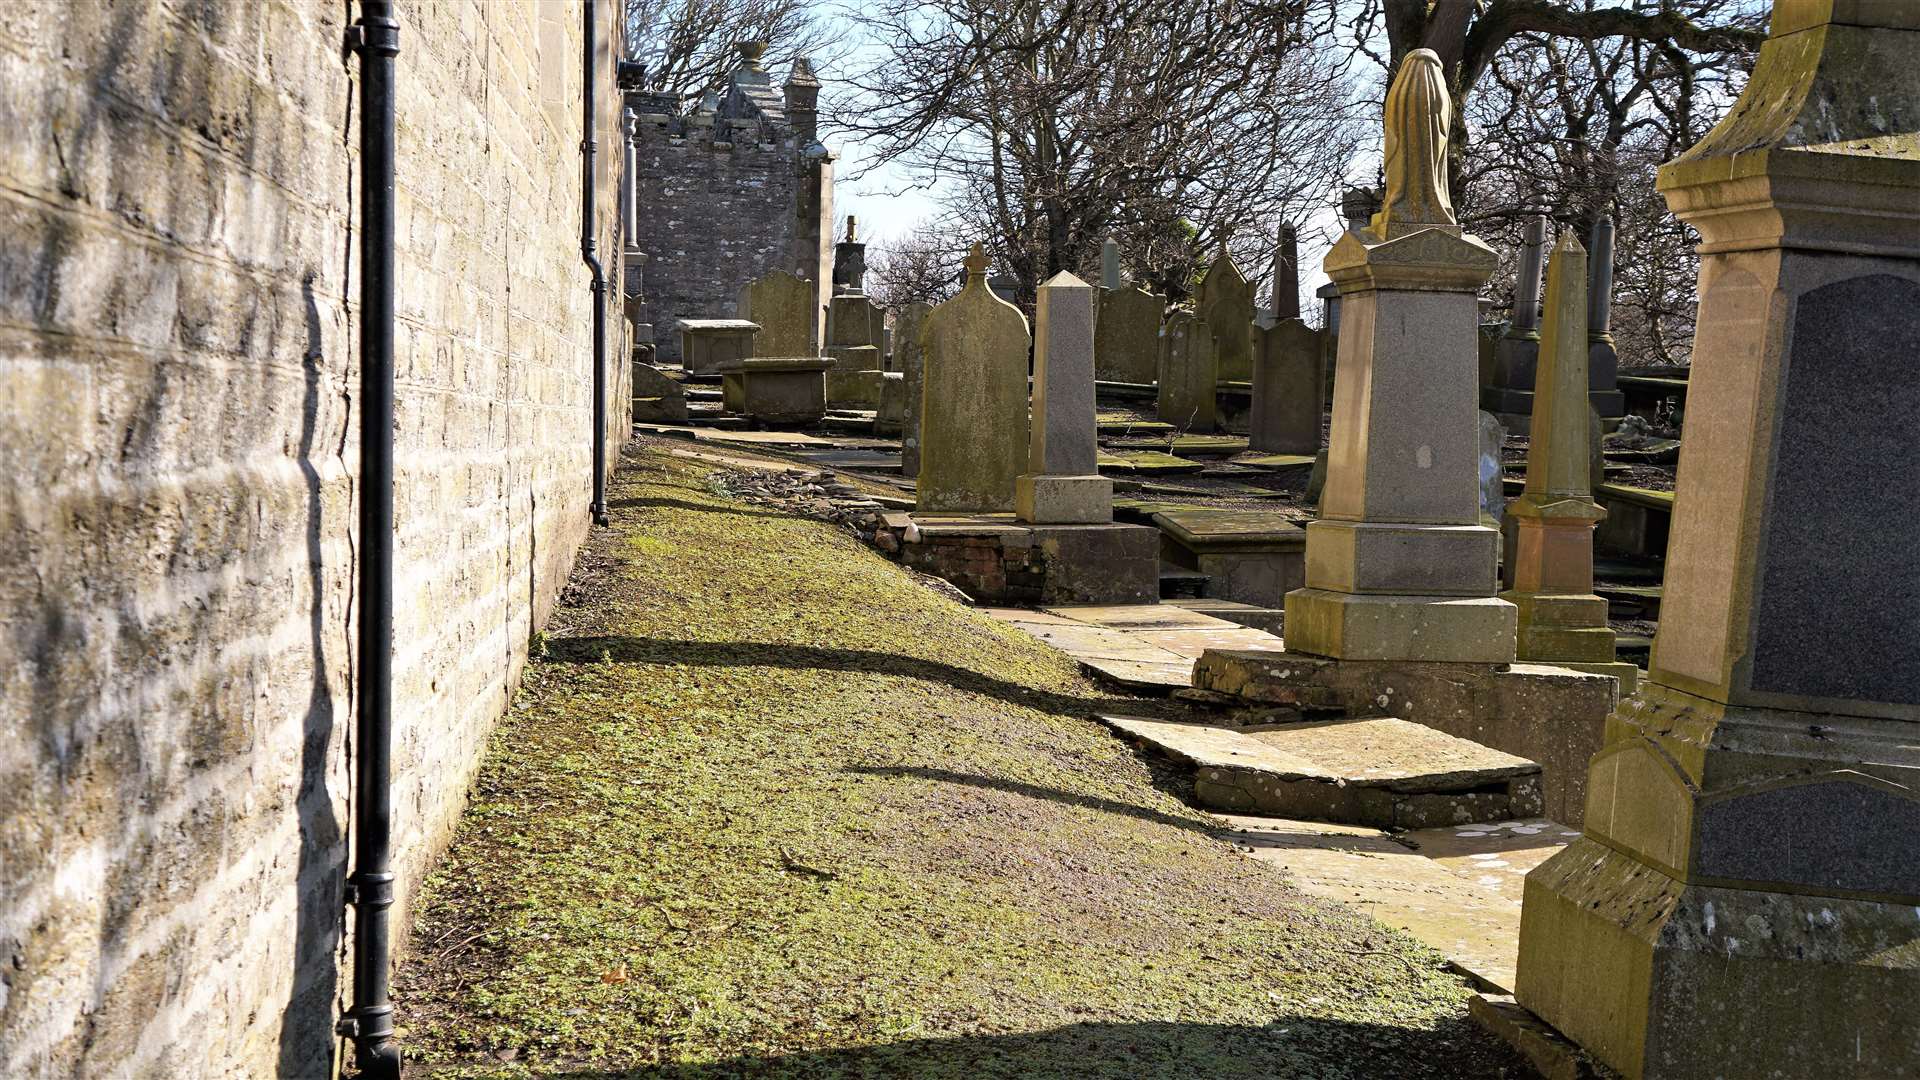 The volunteer gardeners also removed shrubs and weeds from around the church and the adjoining graveyard. Picture: DGS